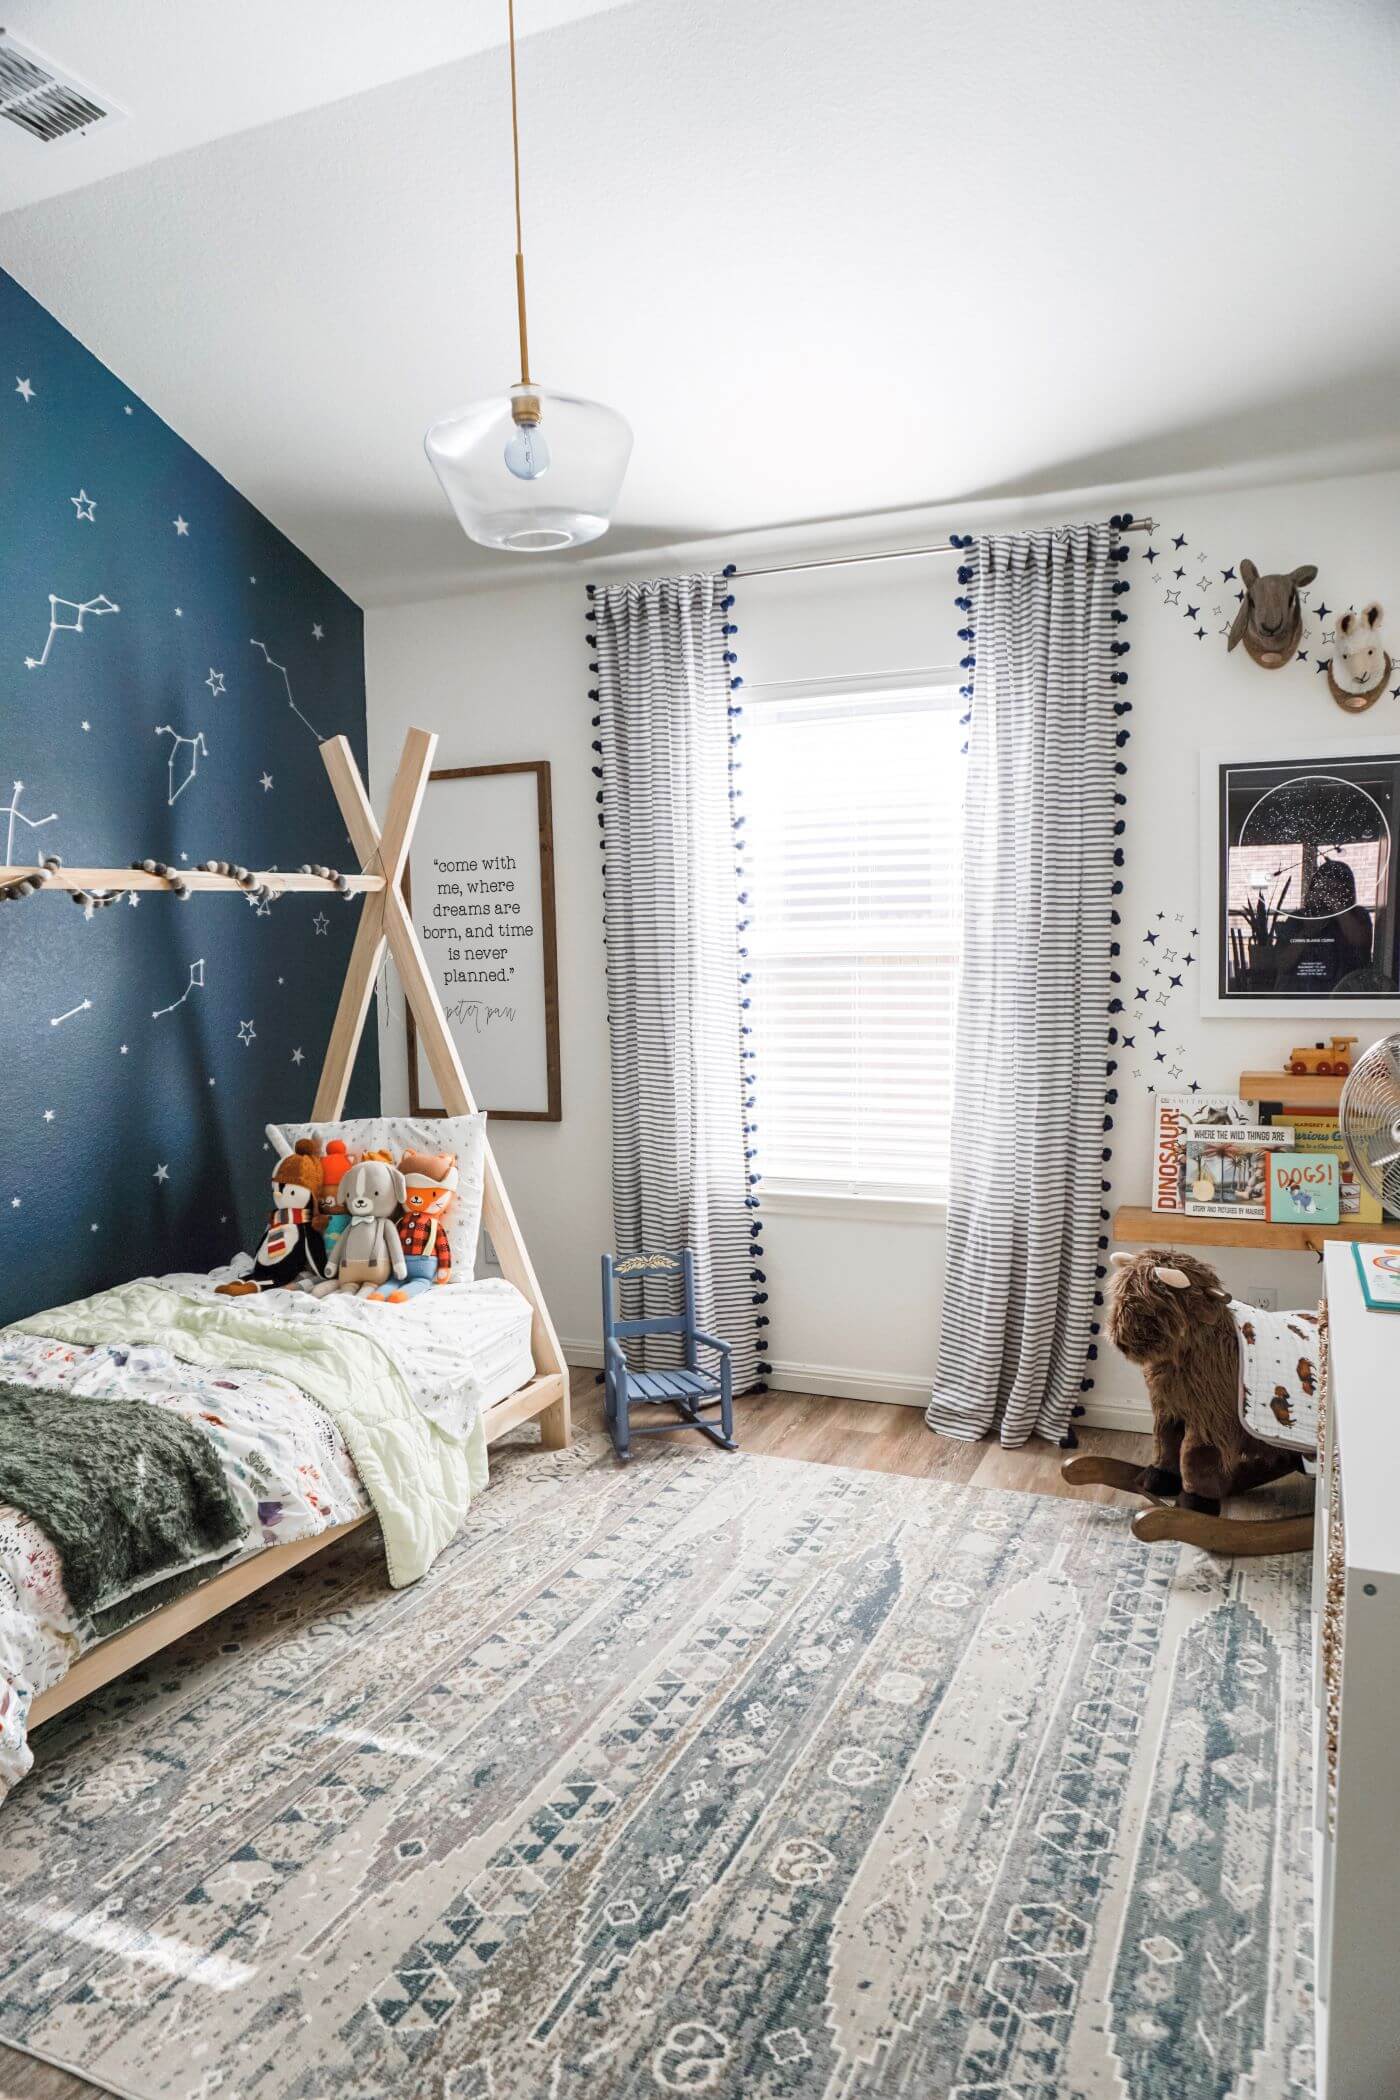 A boy's bedroom with a blue accent wall covered in vinyl star stickers. There is also a tepee bed and a child's rocking chair